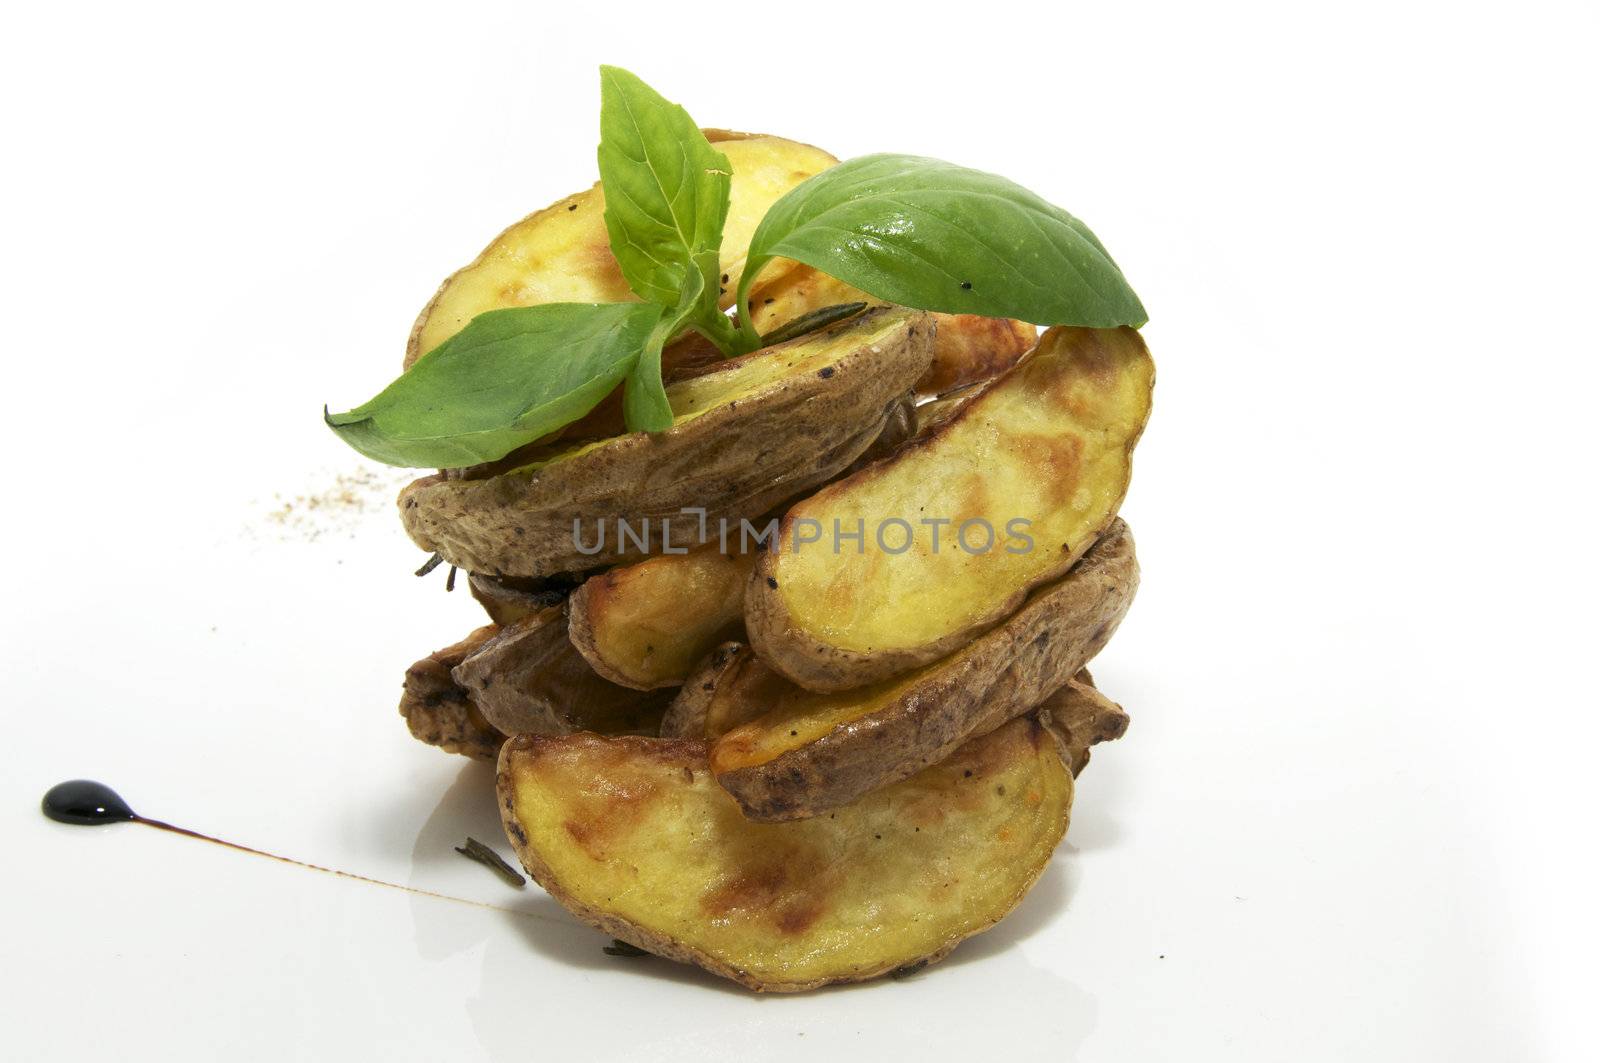 Baked potatoes on a plate decorated with greens